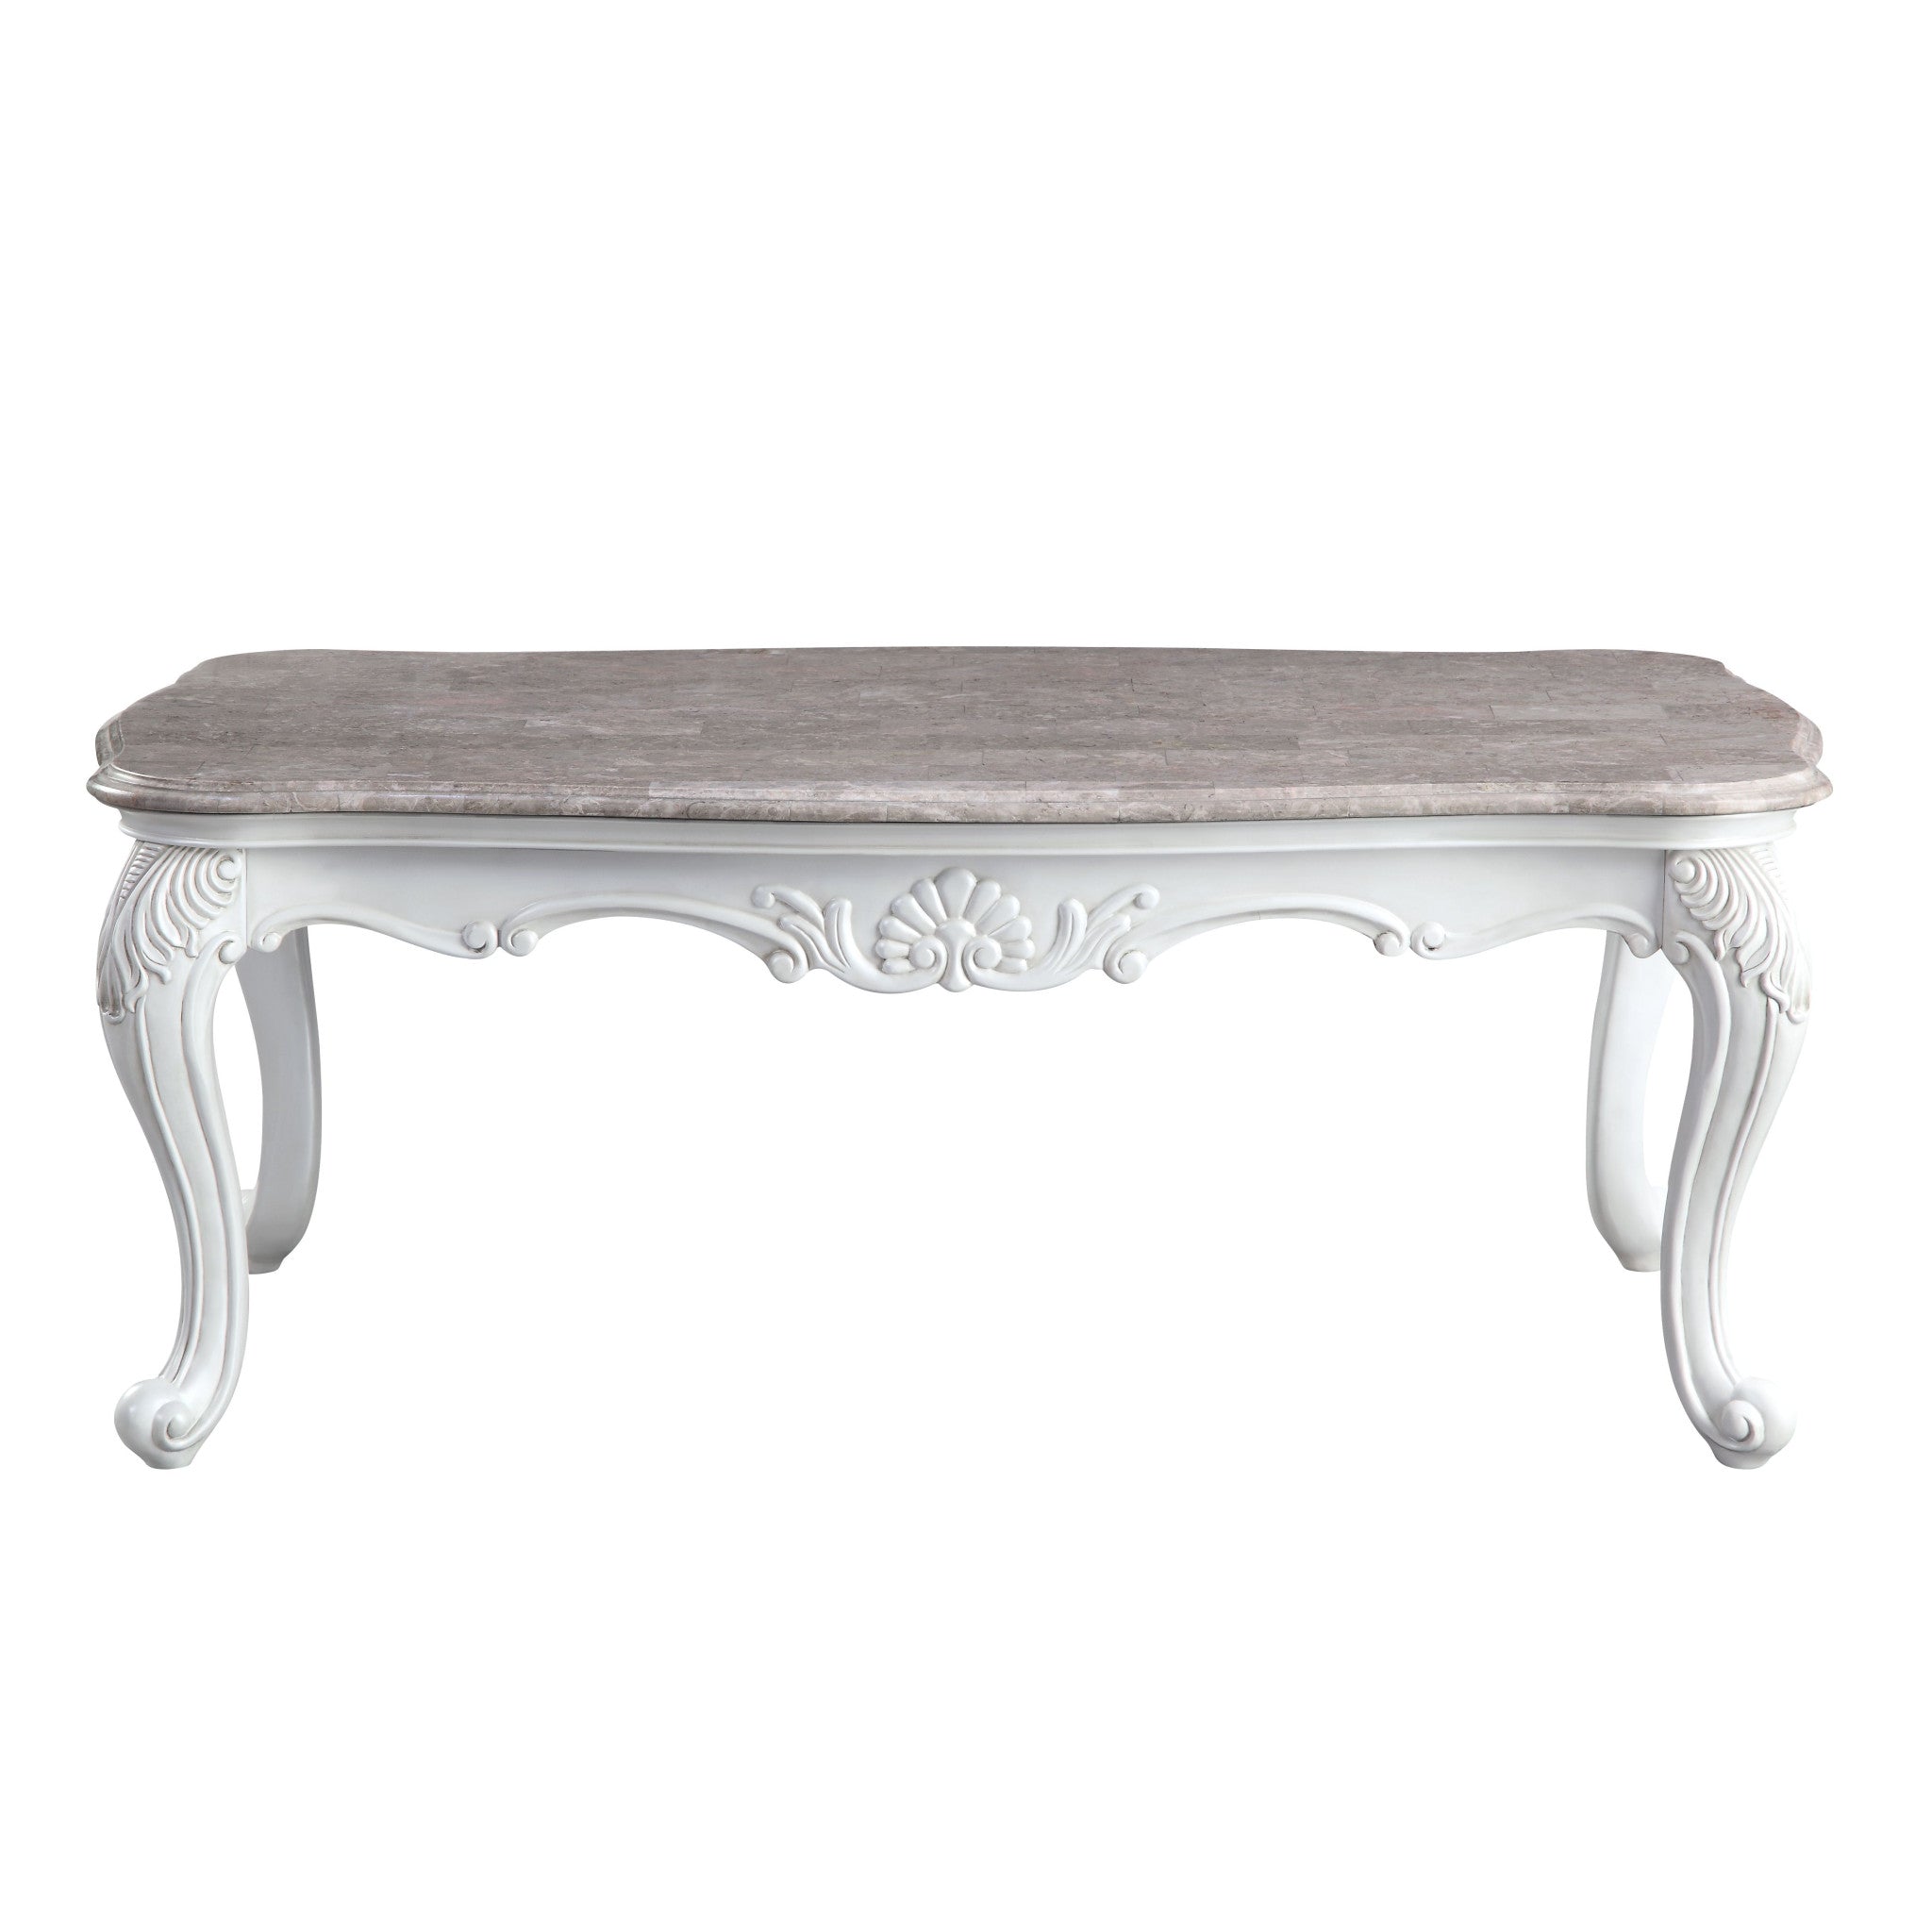 52" White And Marble Faux Marble Rectangular Coffee Table